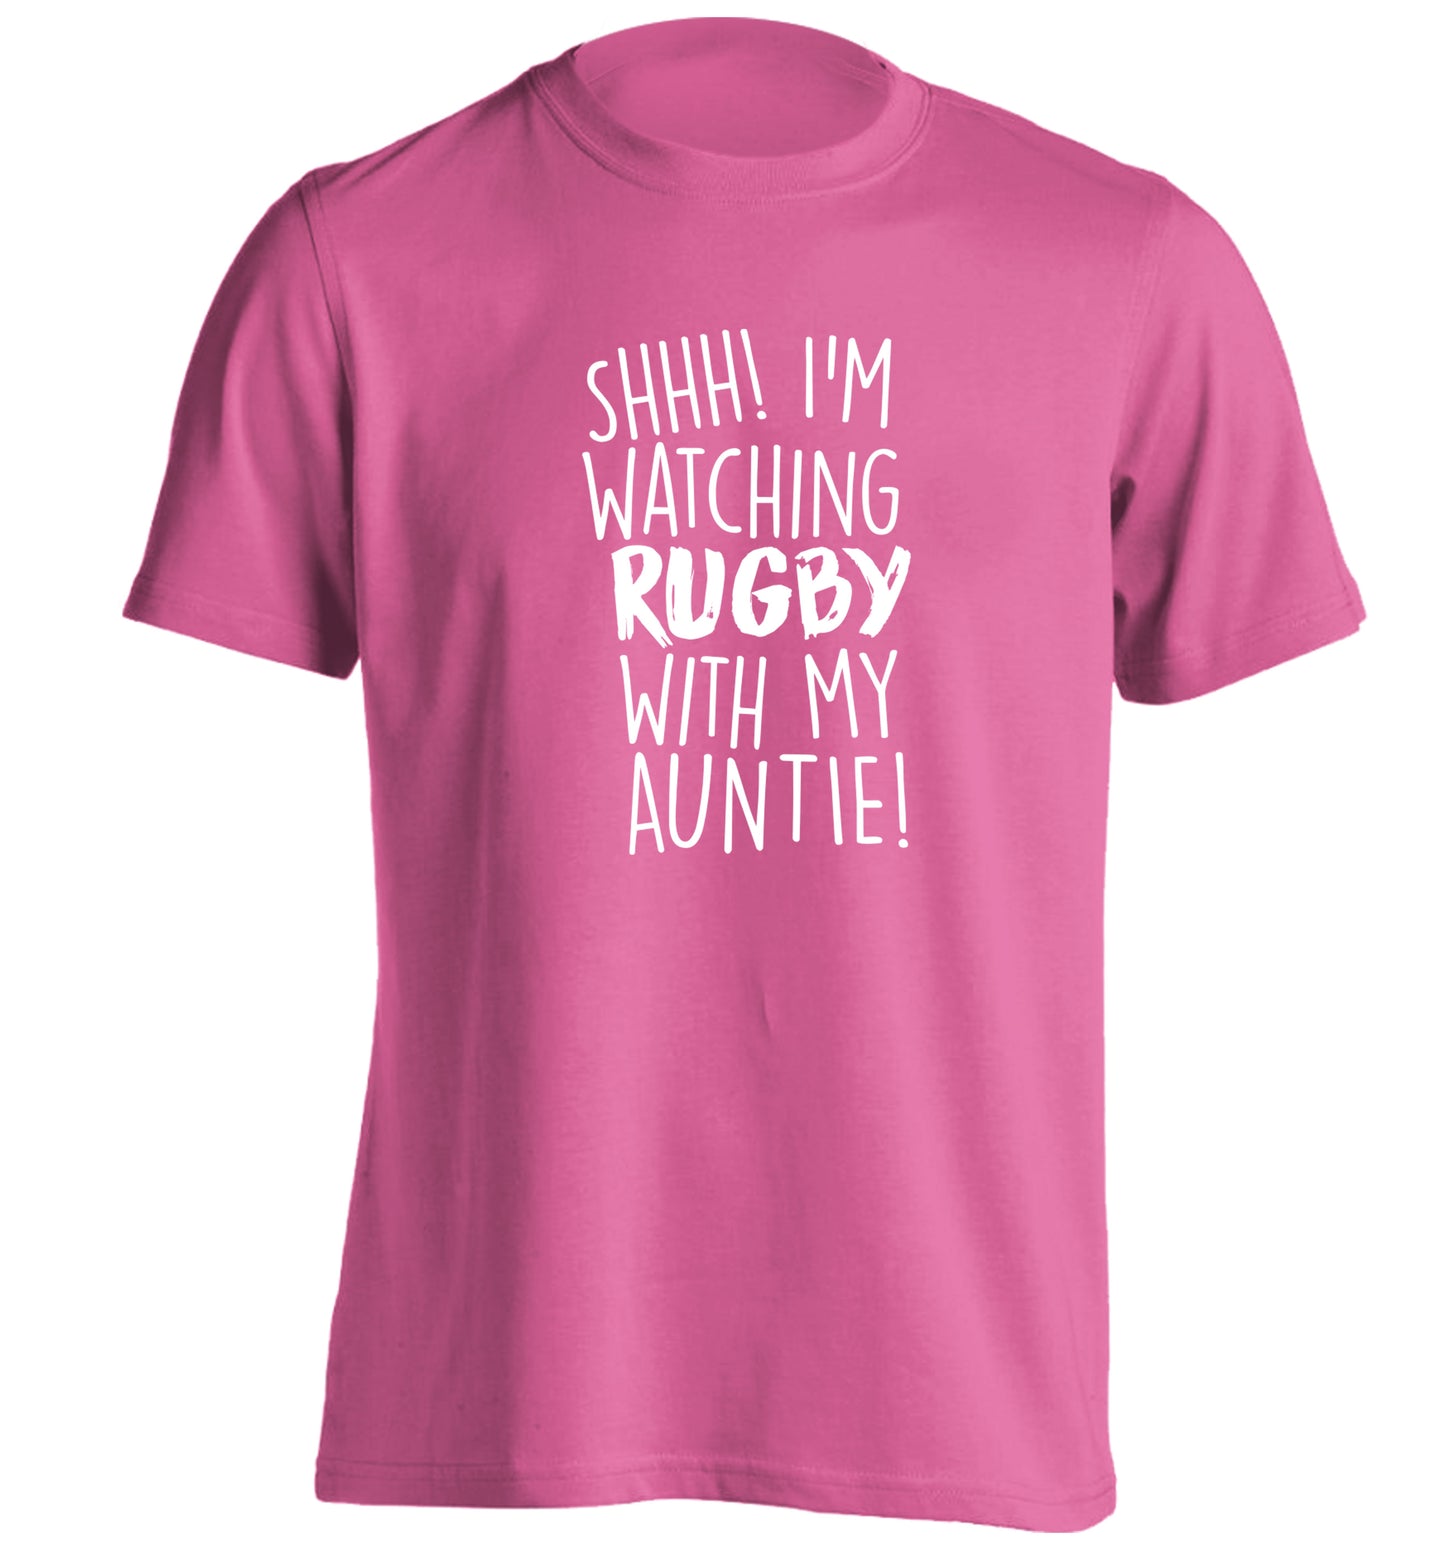 Shhh I'm watchin rugby with my auntie adults unisex pink Tshirt 2XL